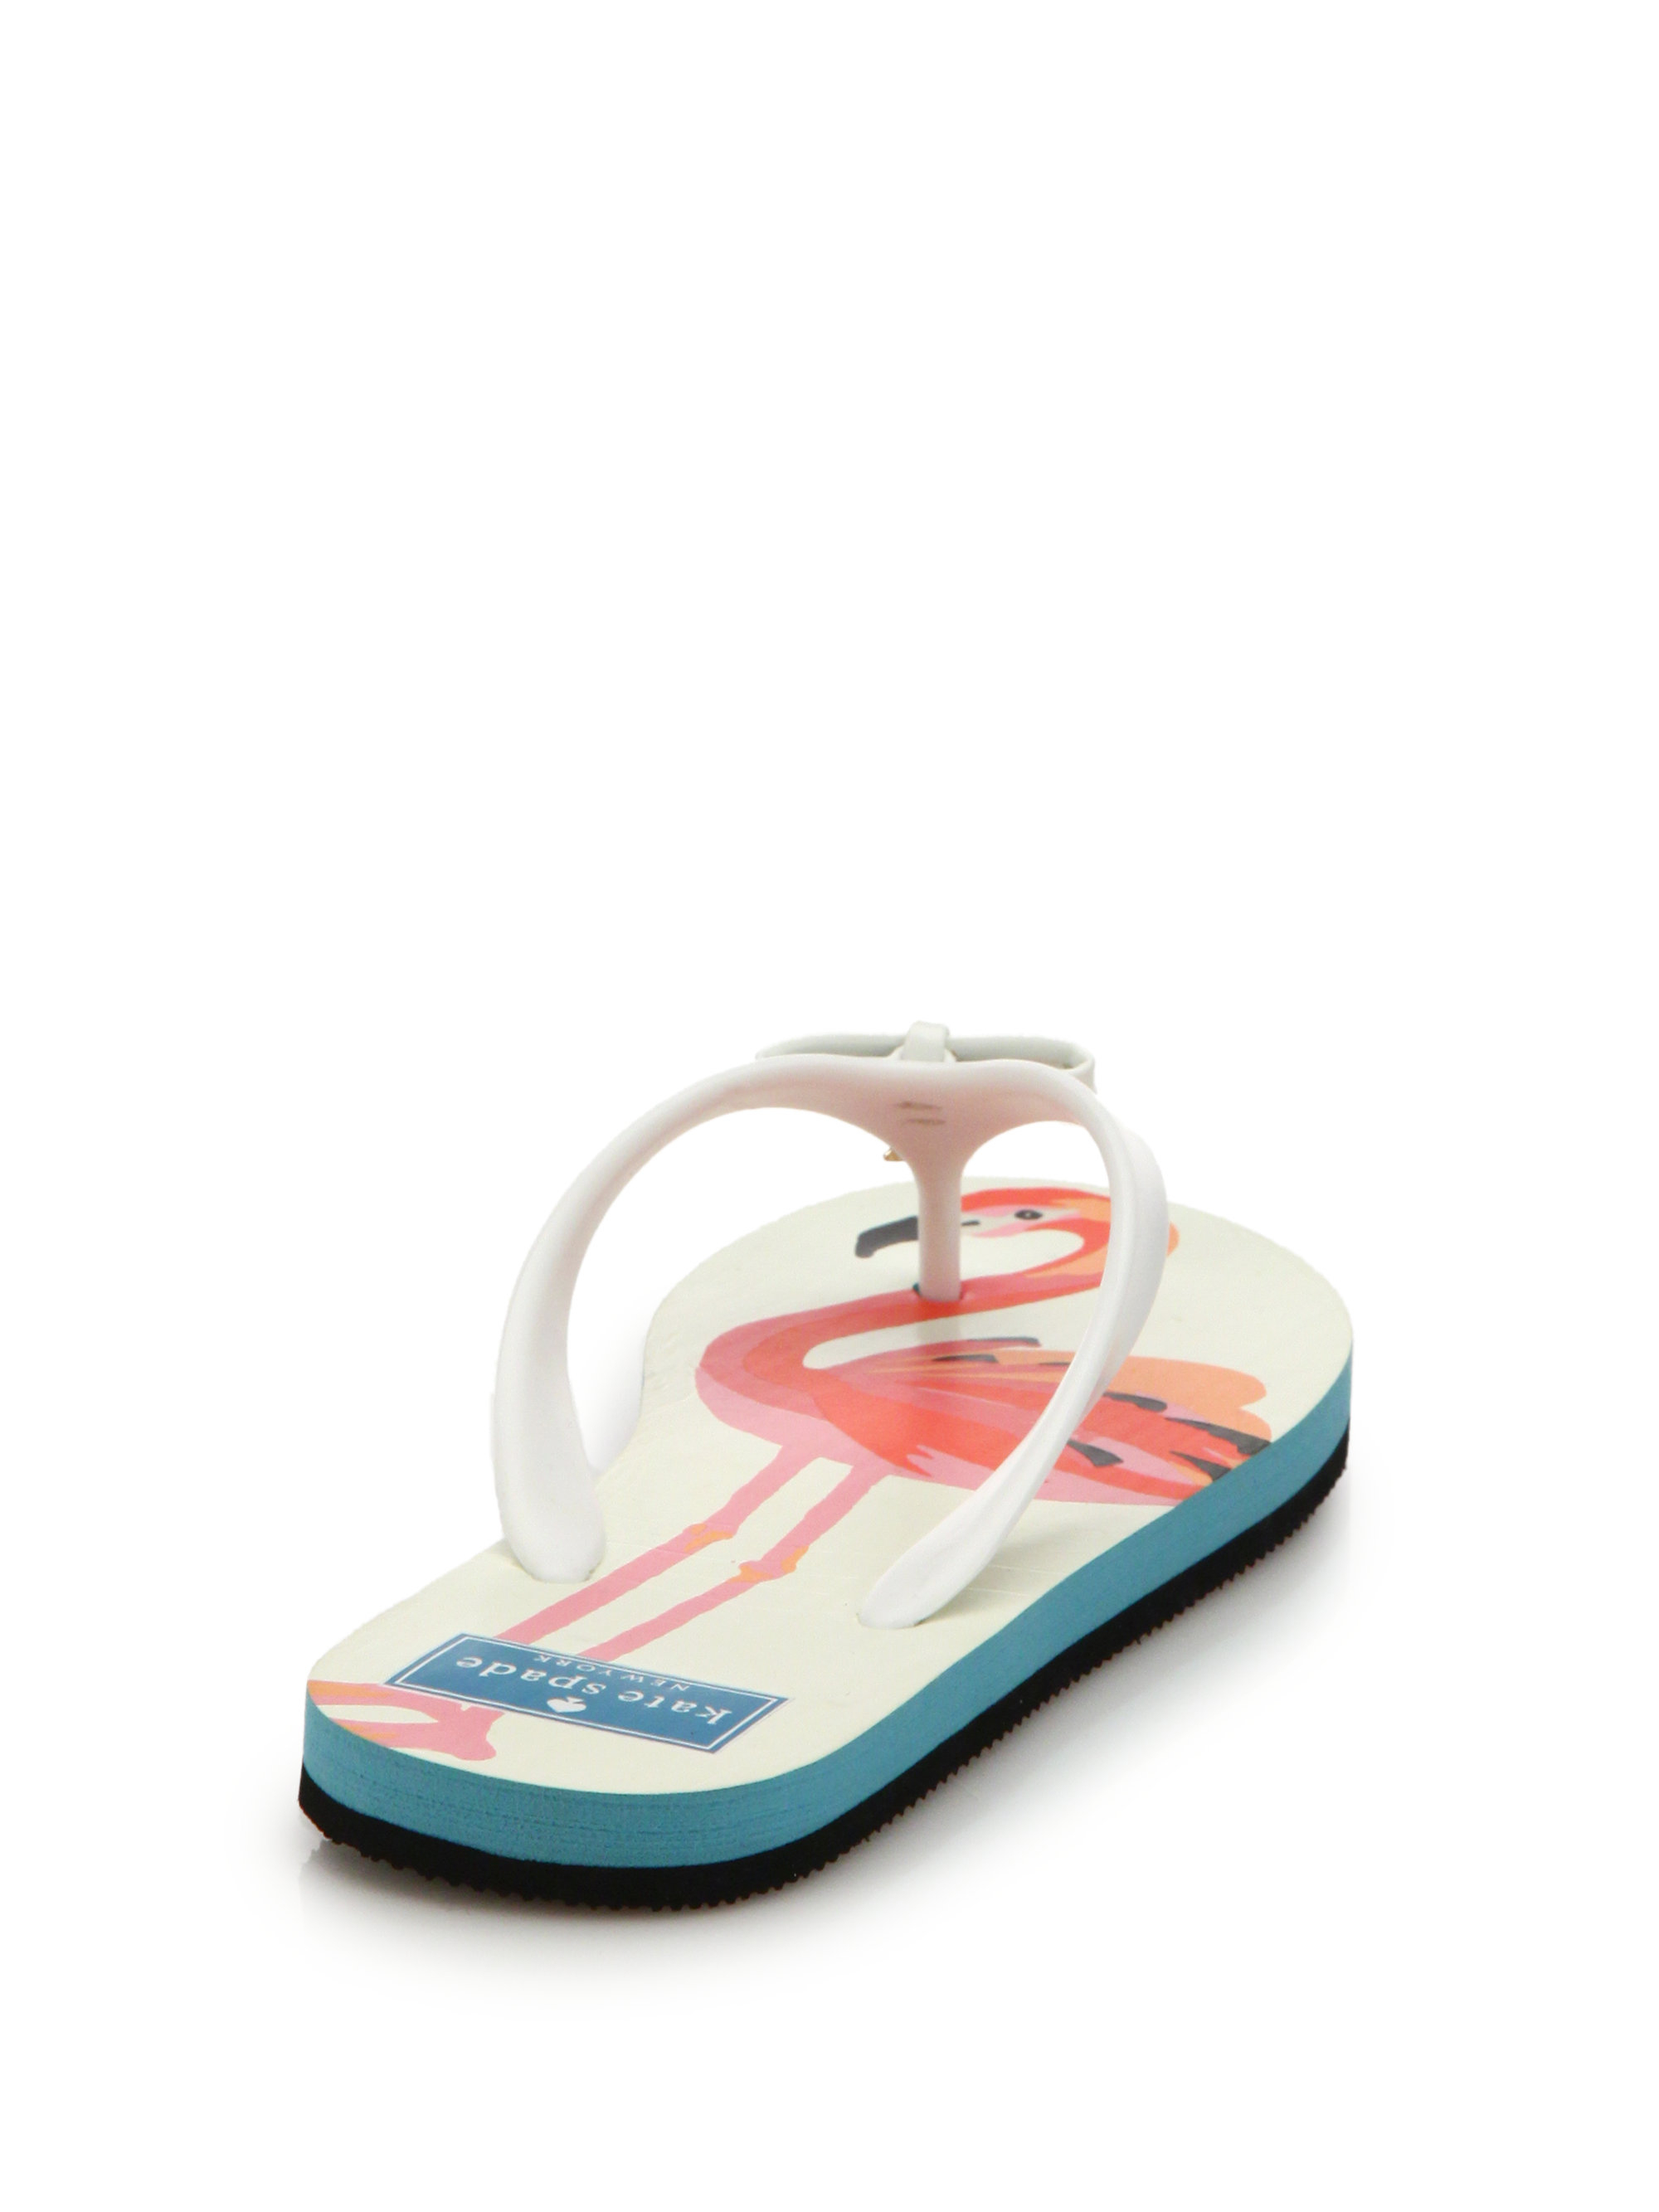 Lyst - Kate Spade New York Fifi Charm Rubber Thong Sandals in White